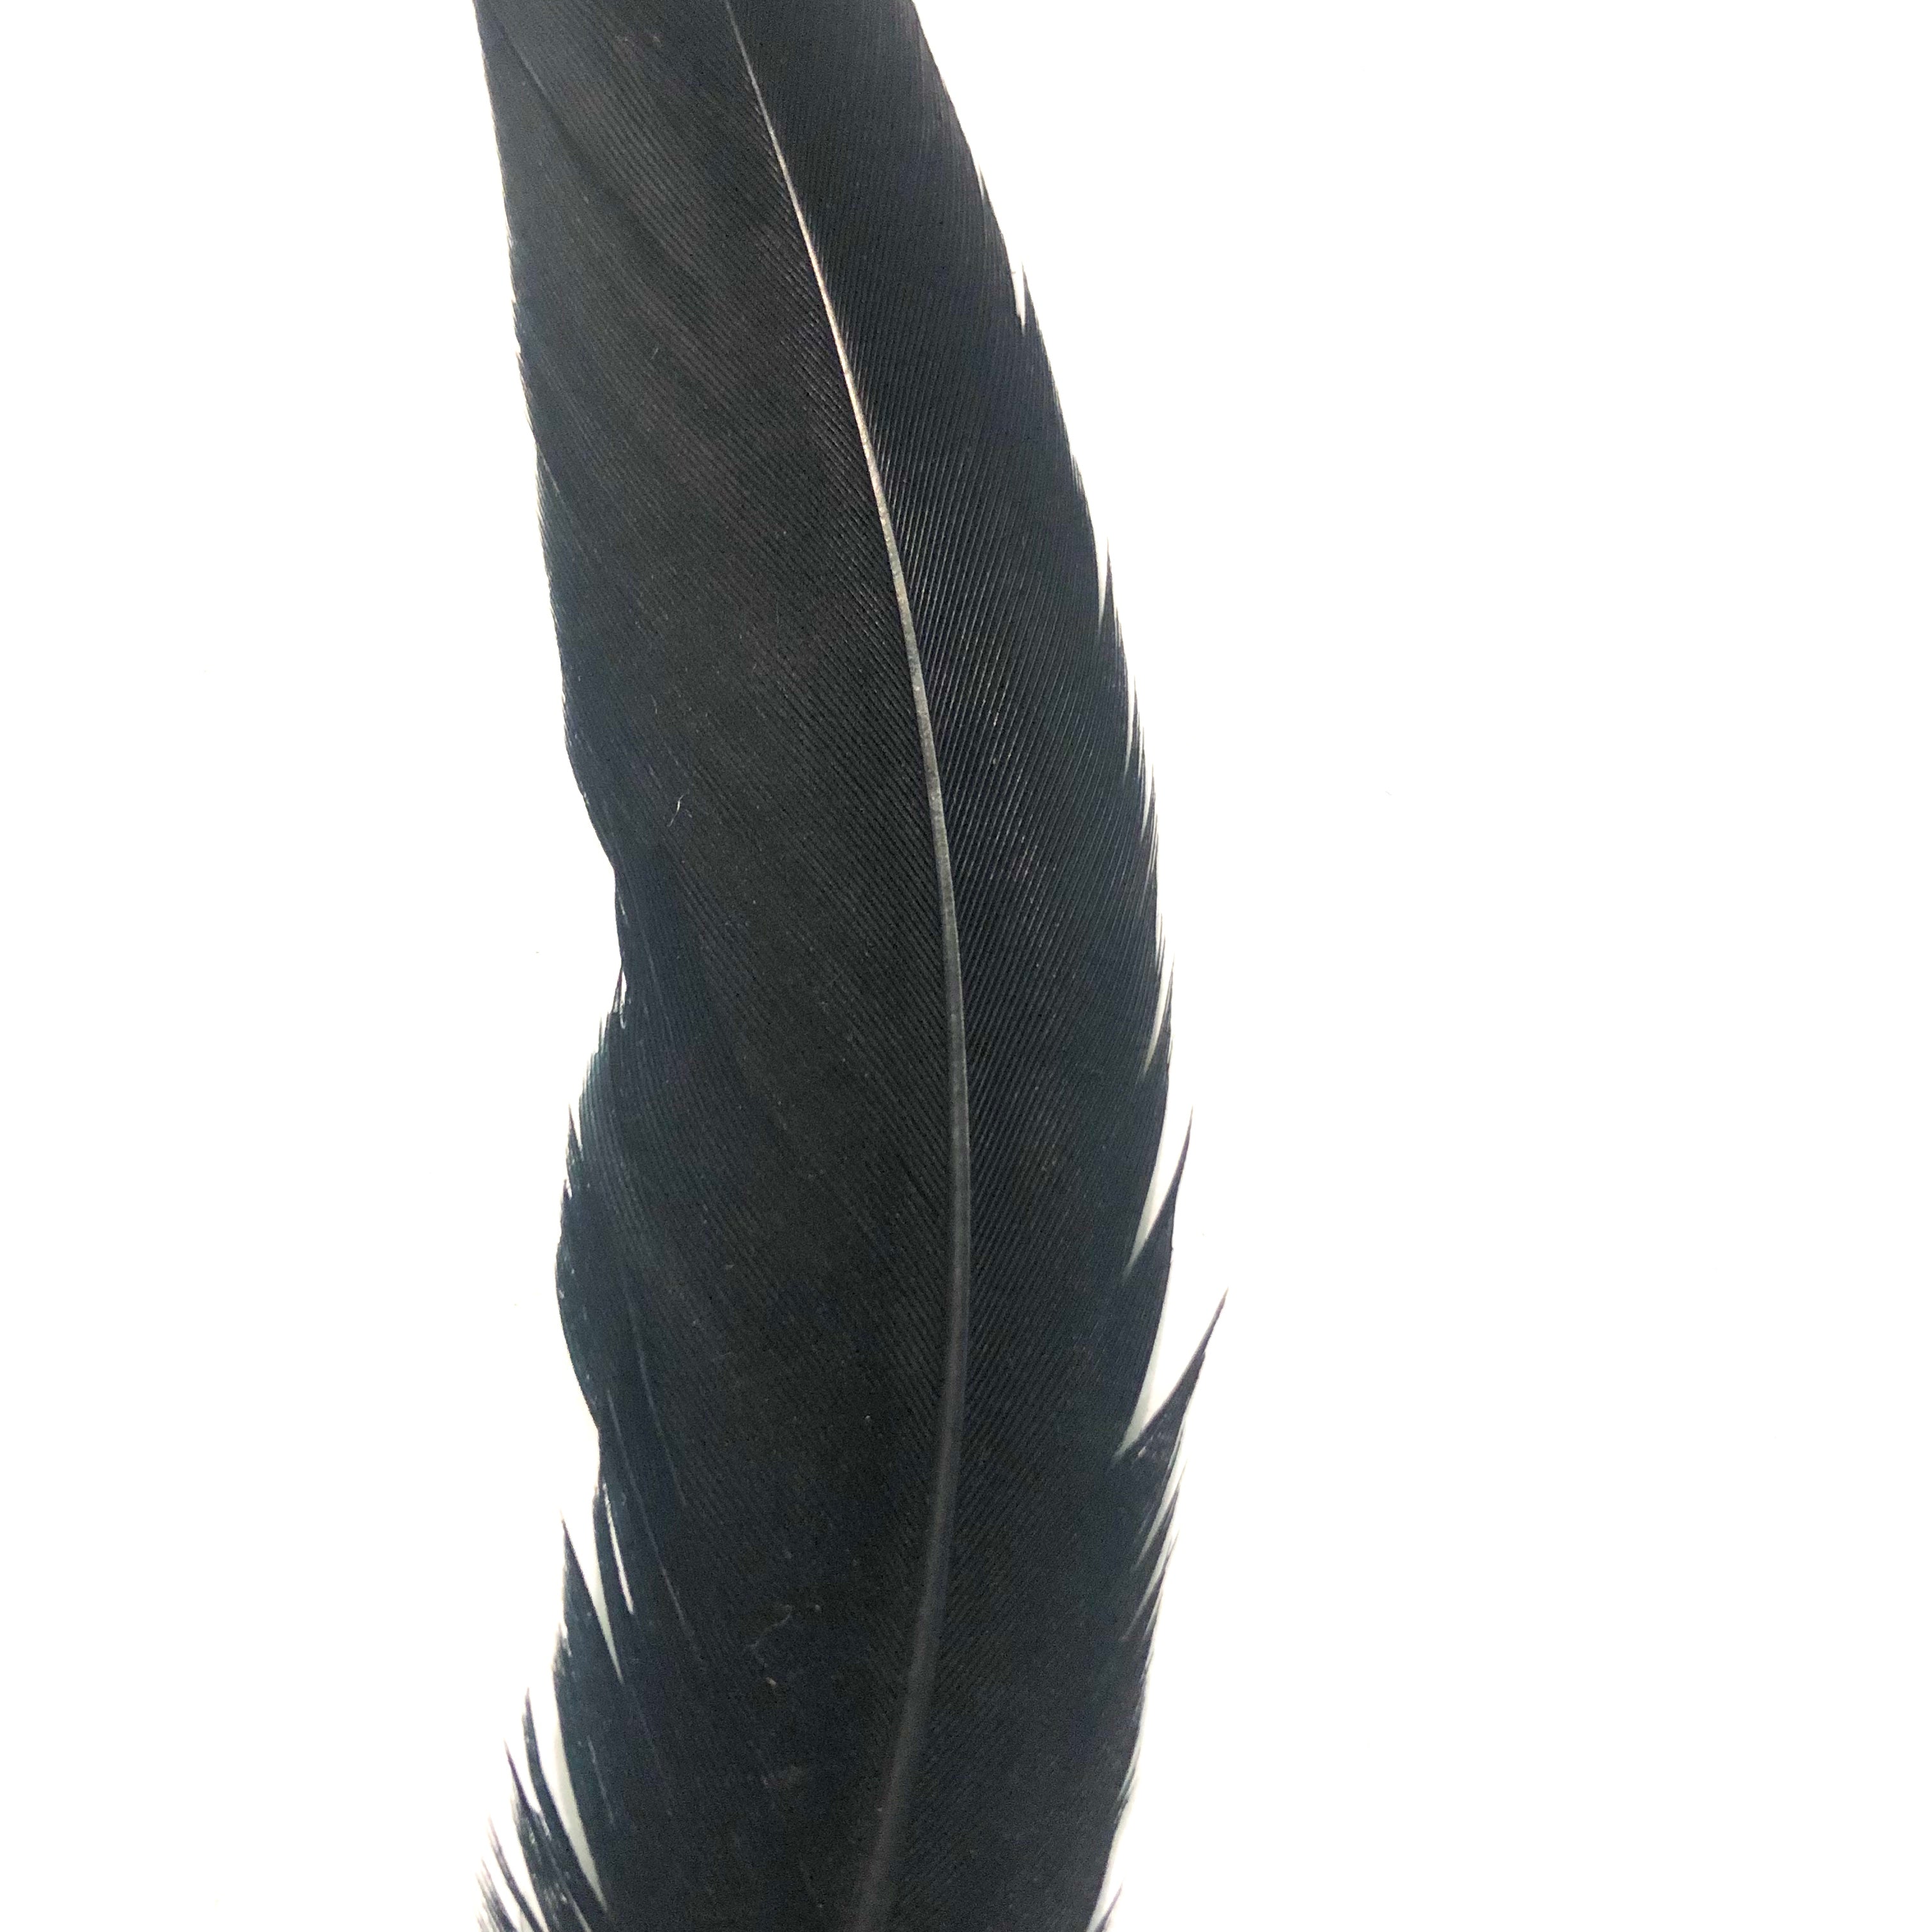 Under 6" Reeves Pheasant Tail Feather x 10 pcs - Black